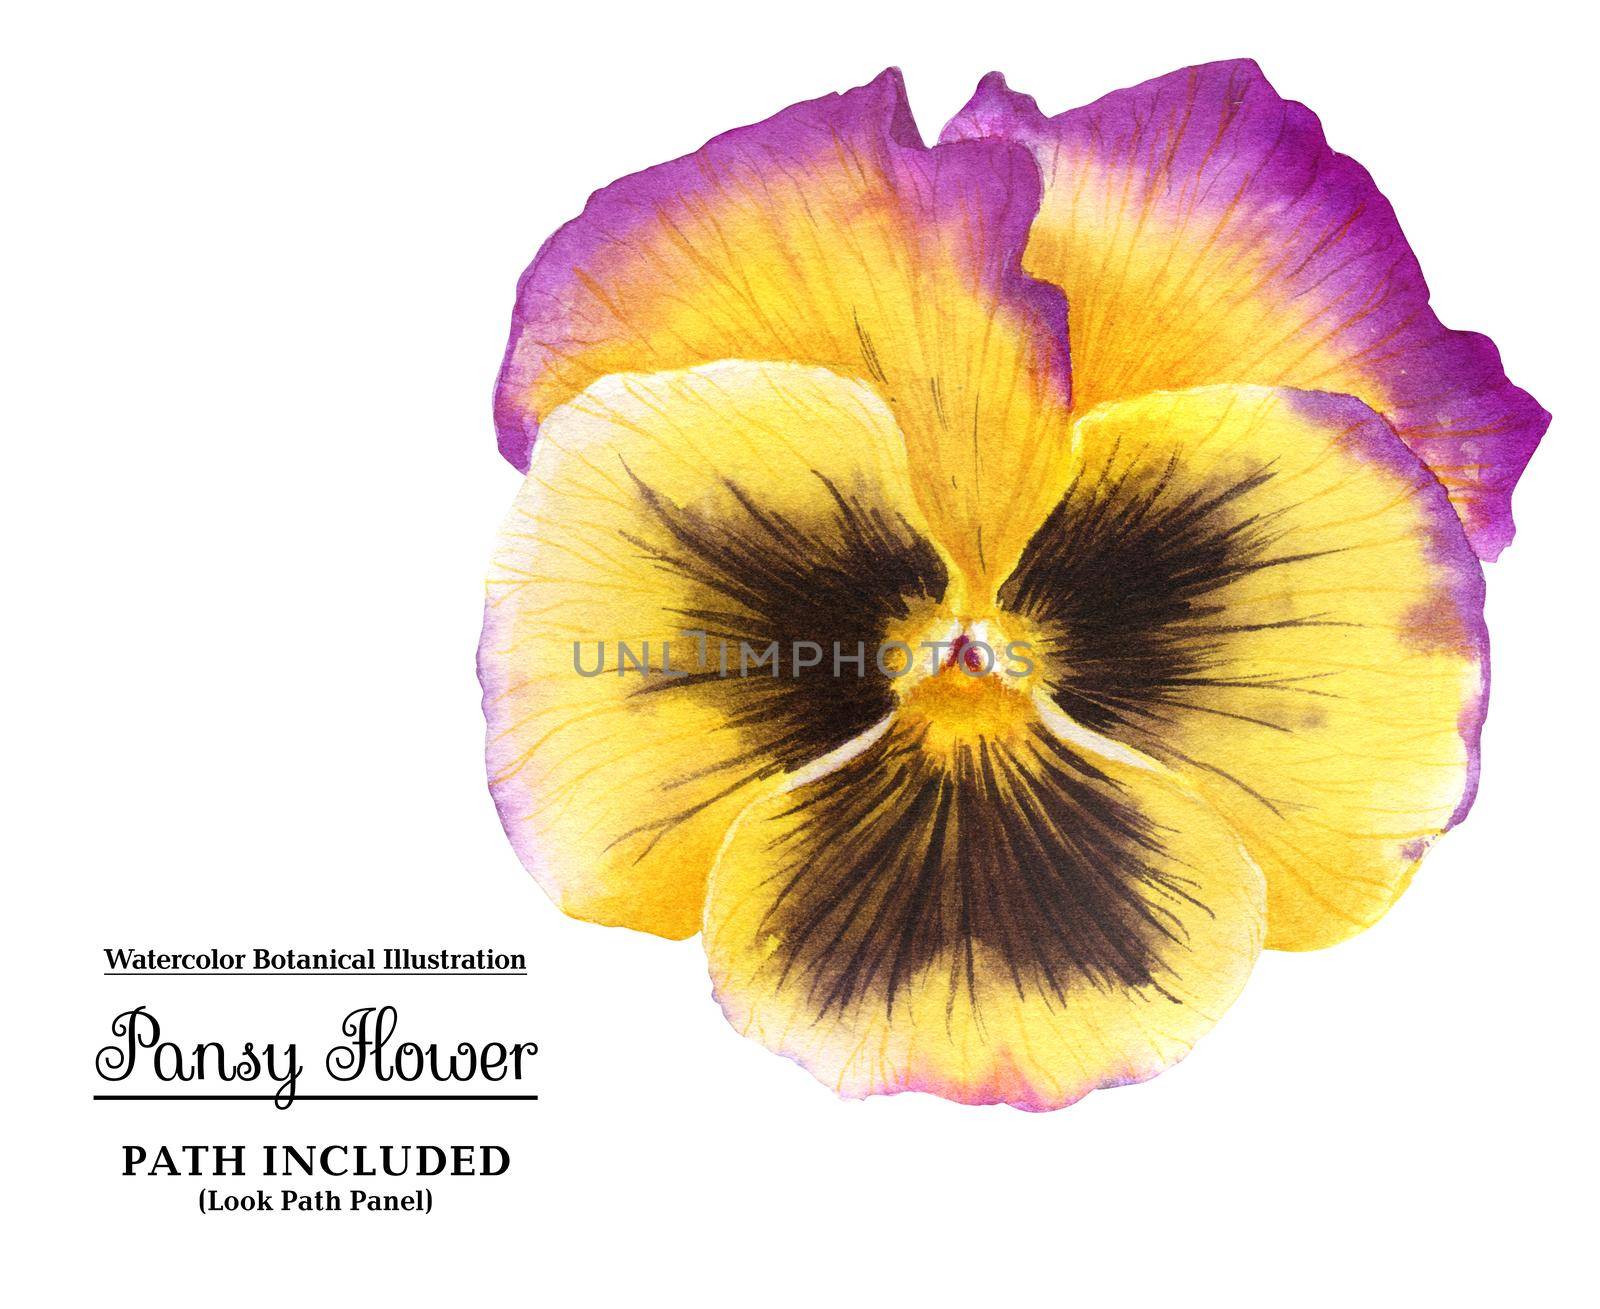 Modern botanical watercolor illustration Yellow pink pansy flower on a white background. Isolated, path included